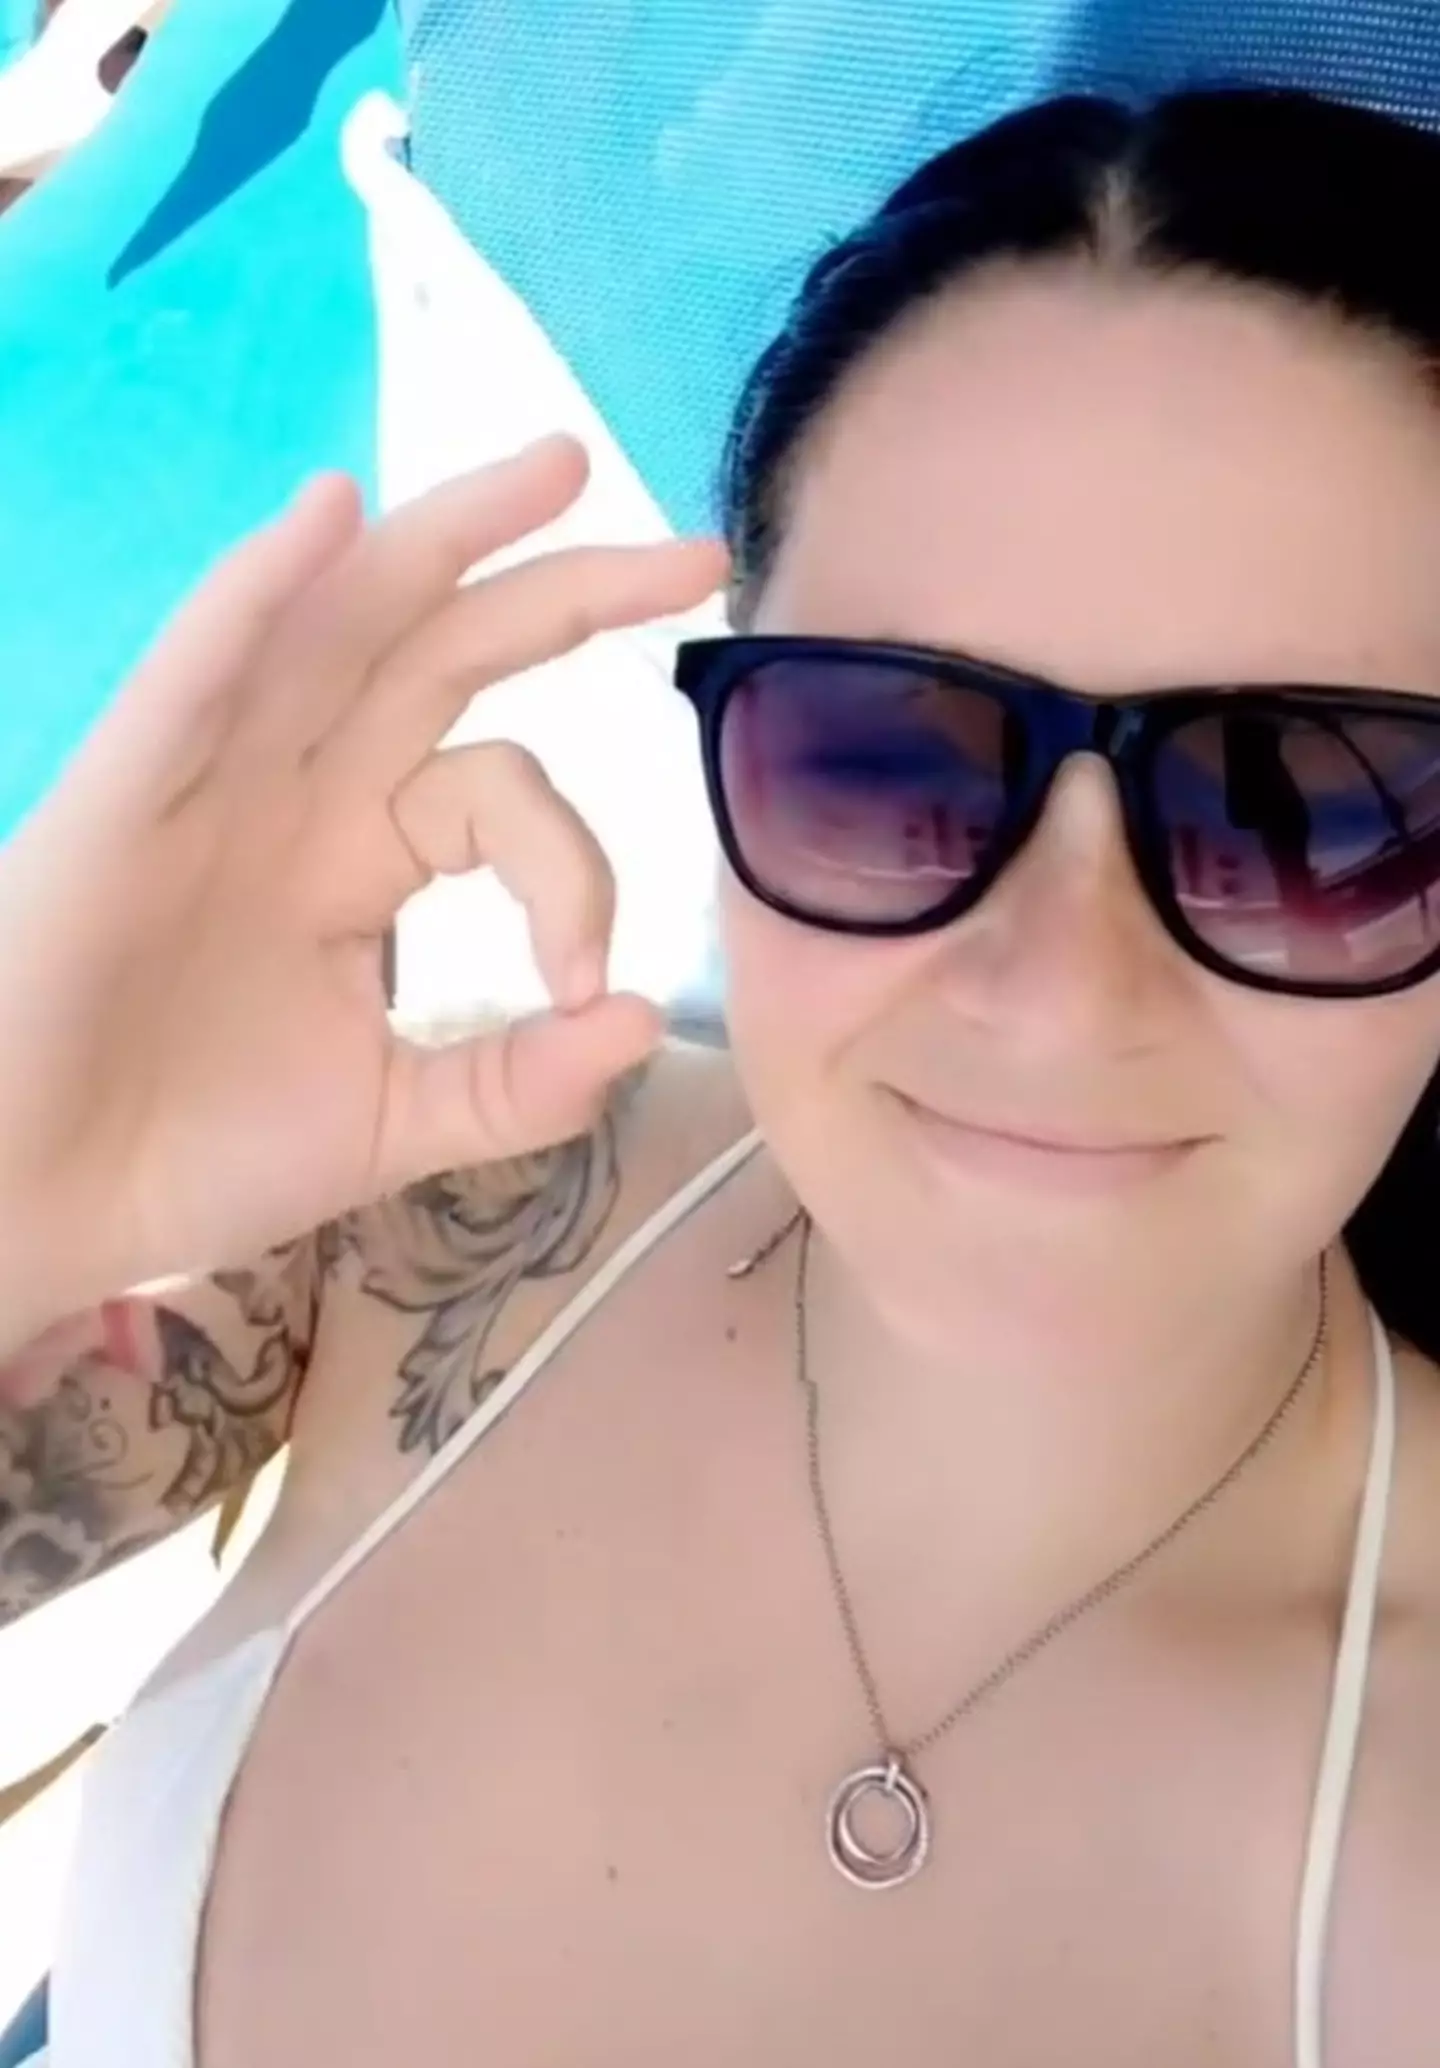 The 39-year-old mum posted on TikTok that she was 'stealing' the all-inclusive experience.